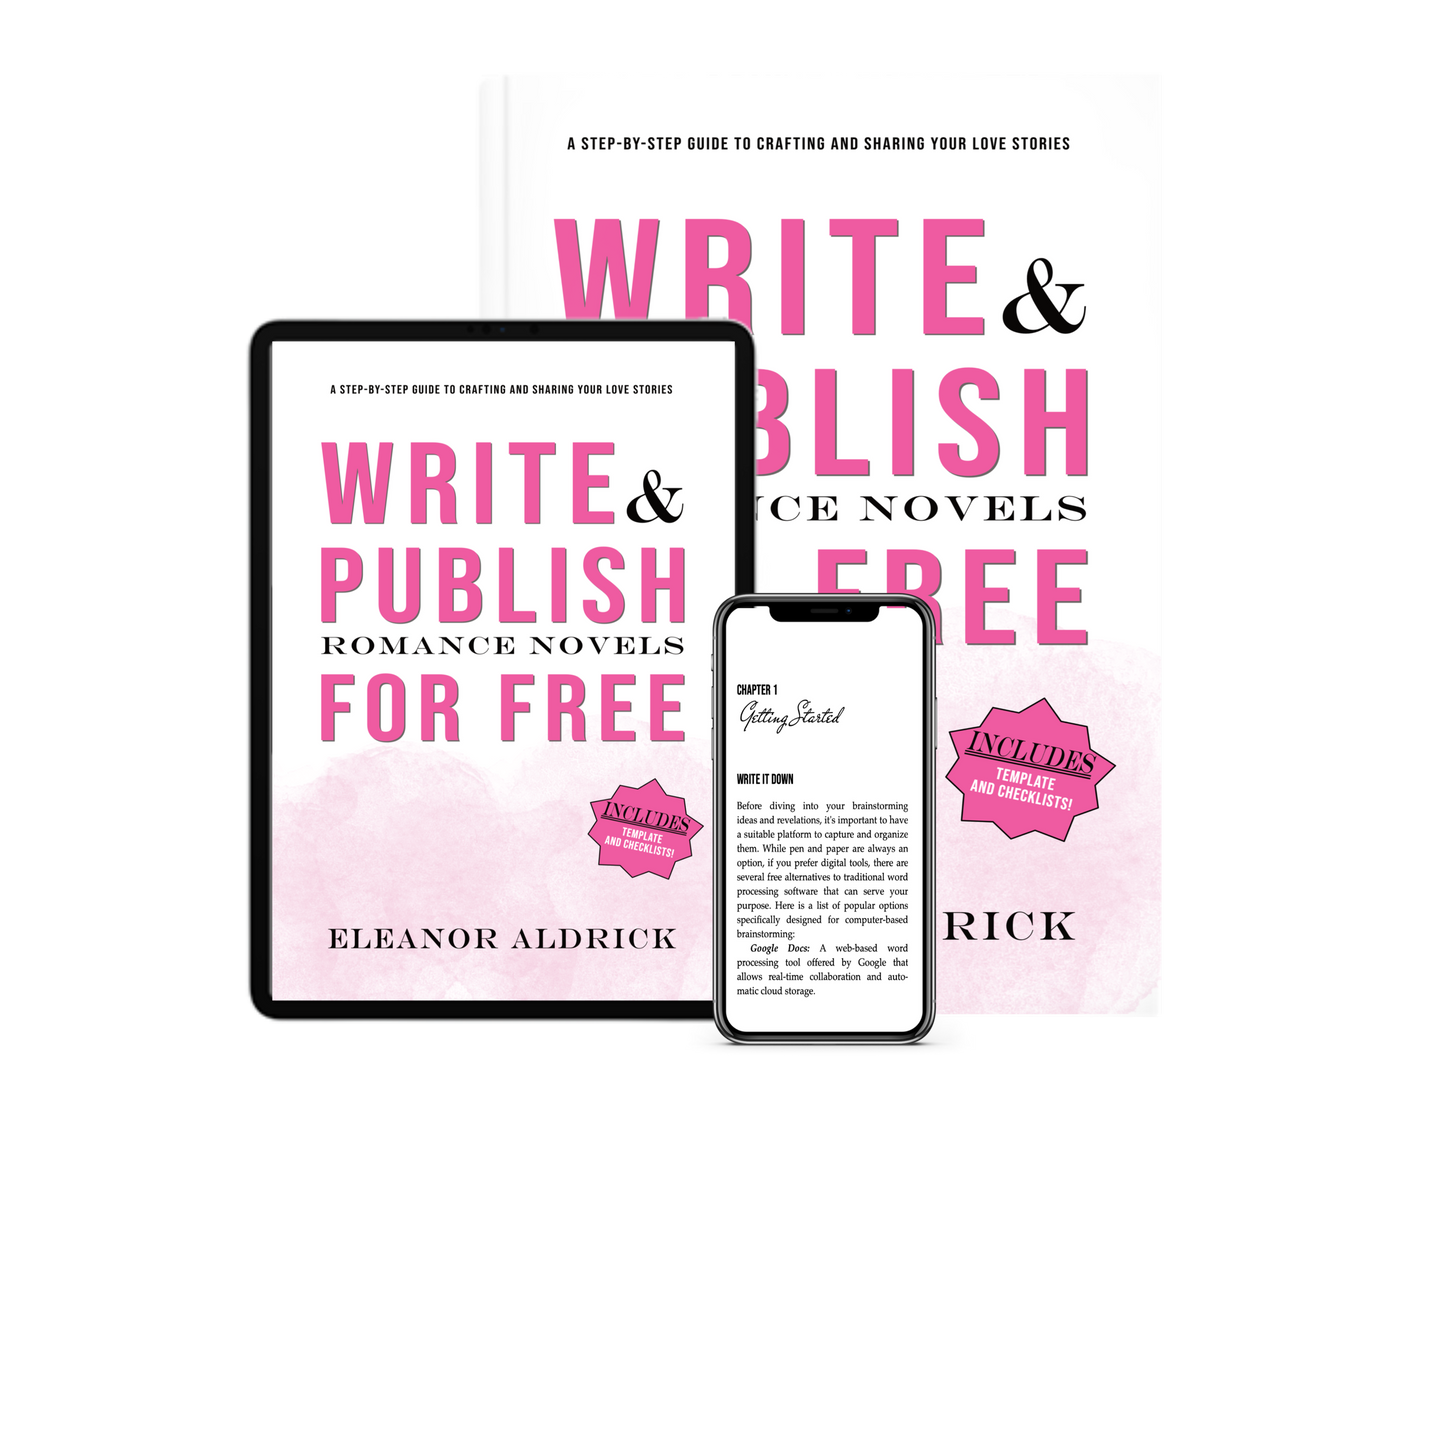 Write and Publish Romance Novels for Free: A Step-by-Step Guide to Crafting and Sharing Your Love Stories